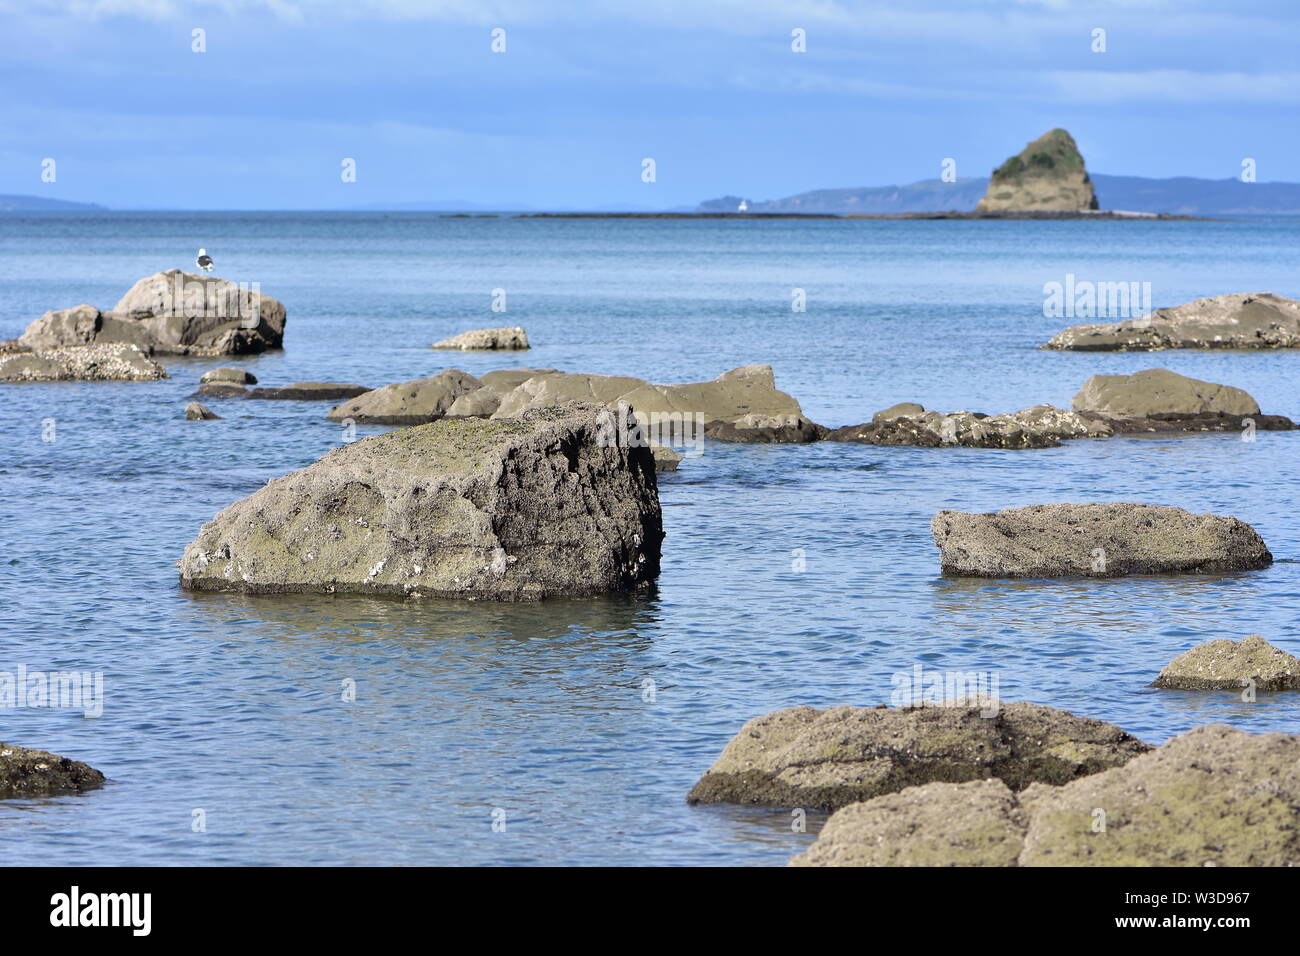 Rocks protruding from calm sea surface with islet and rocky reef in background. Stock Photo